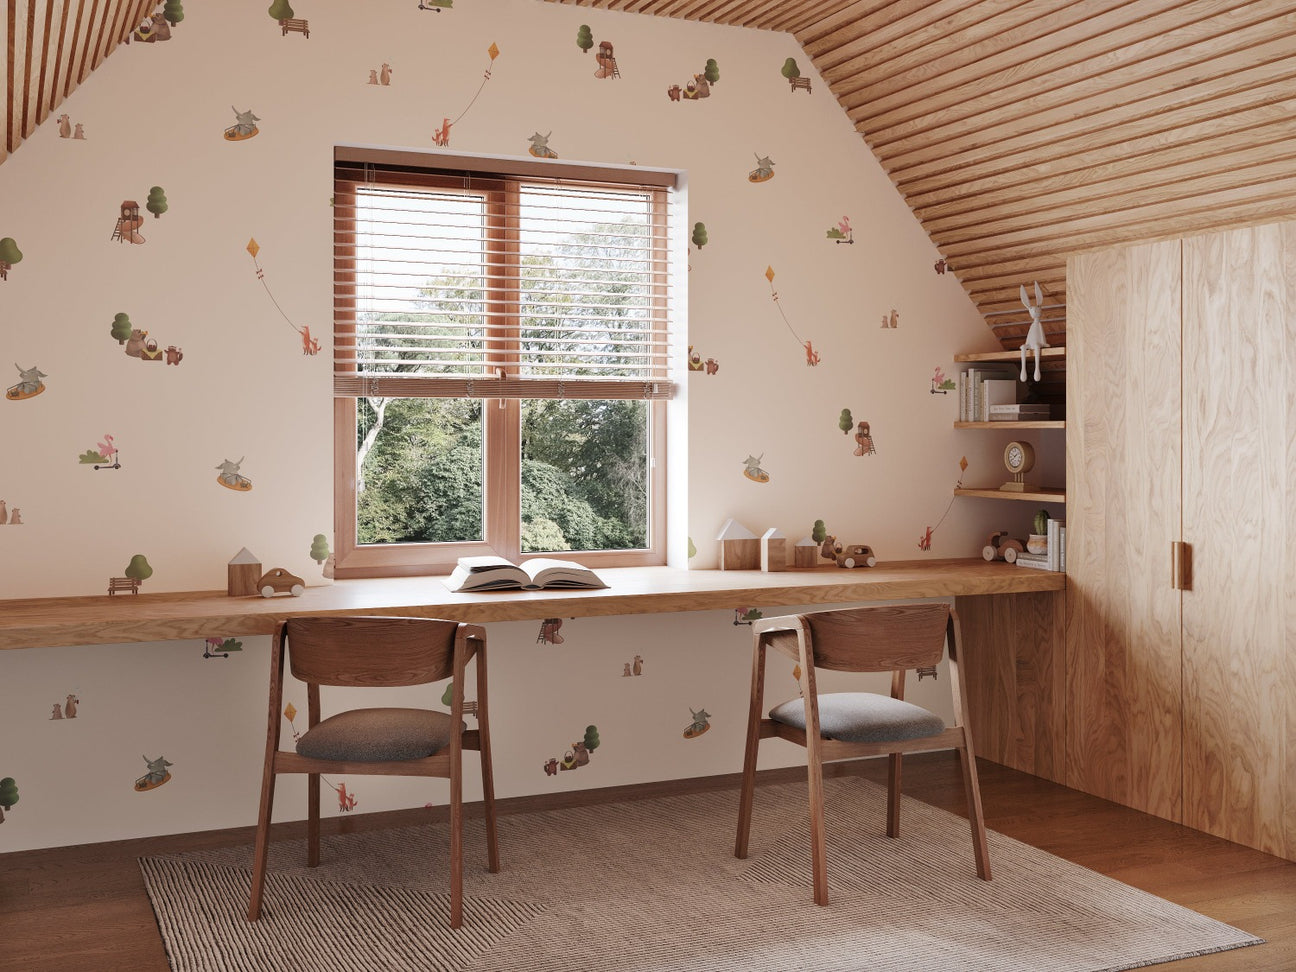 animal-playground-patterned-wallpaper in study room